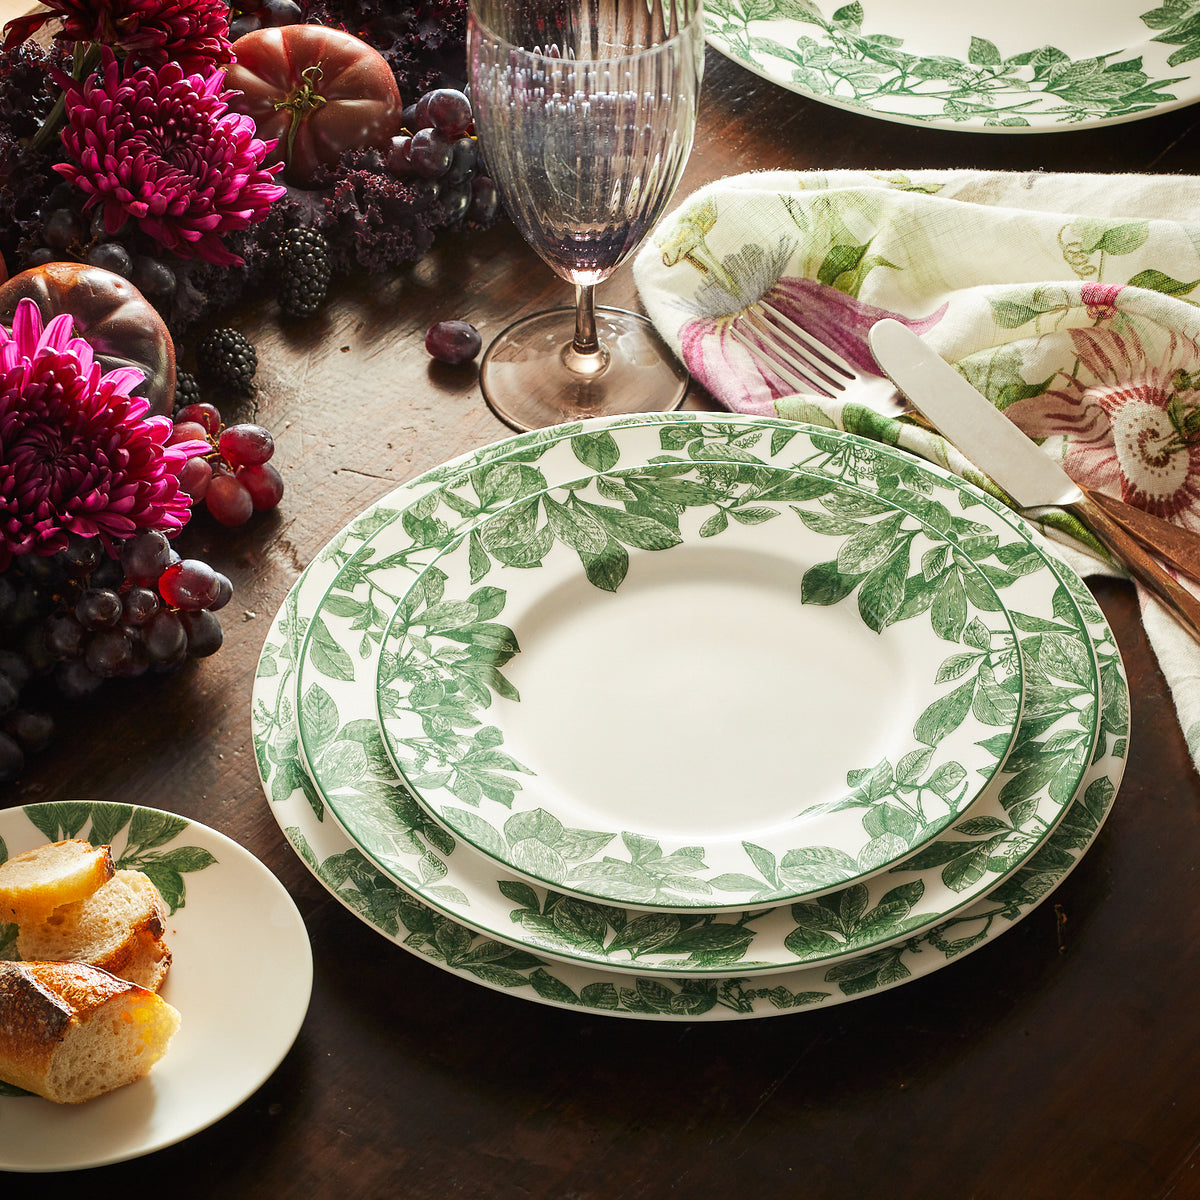 A vintage romance table setting featuring Caskata Arbor Green Dinner Plates with a green border, complemented by a cluster of grapes as an elegant centerpiece.